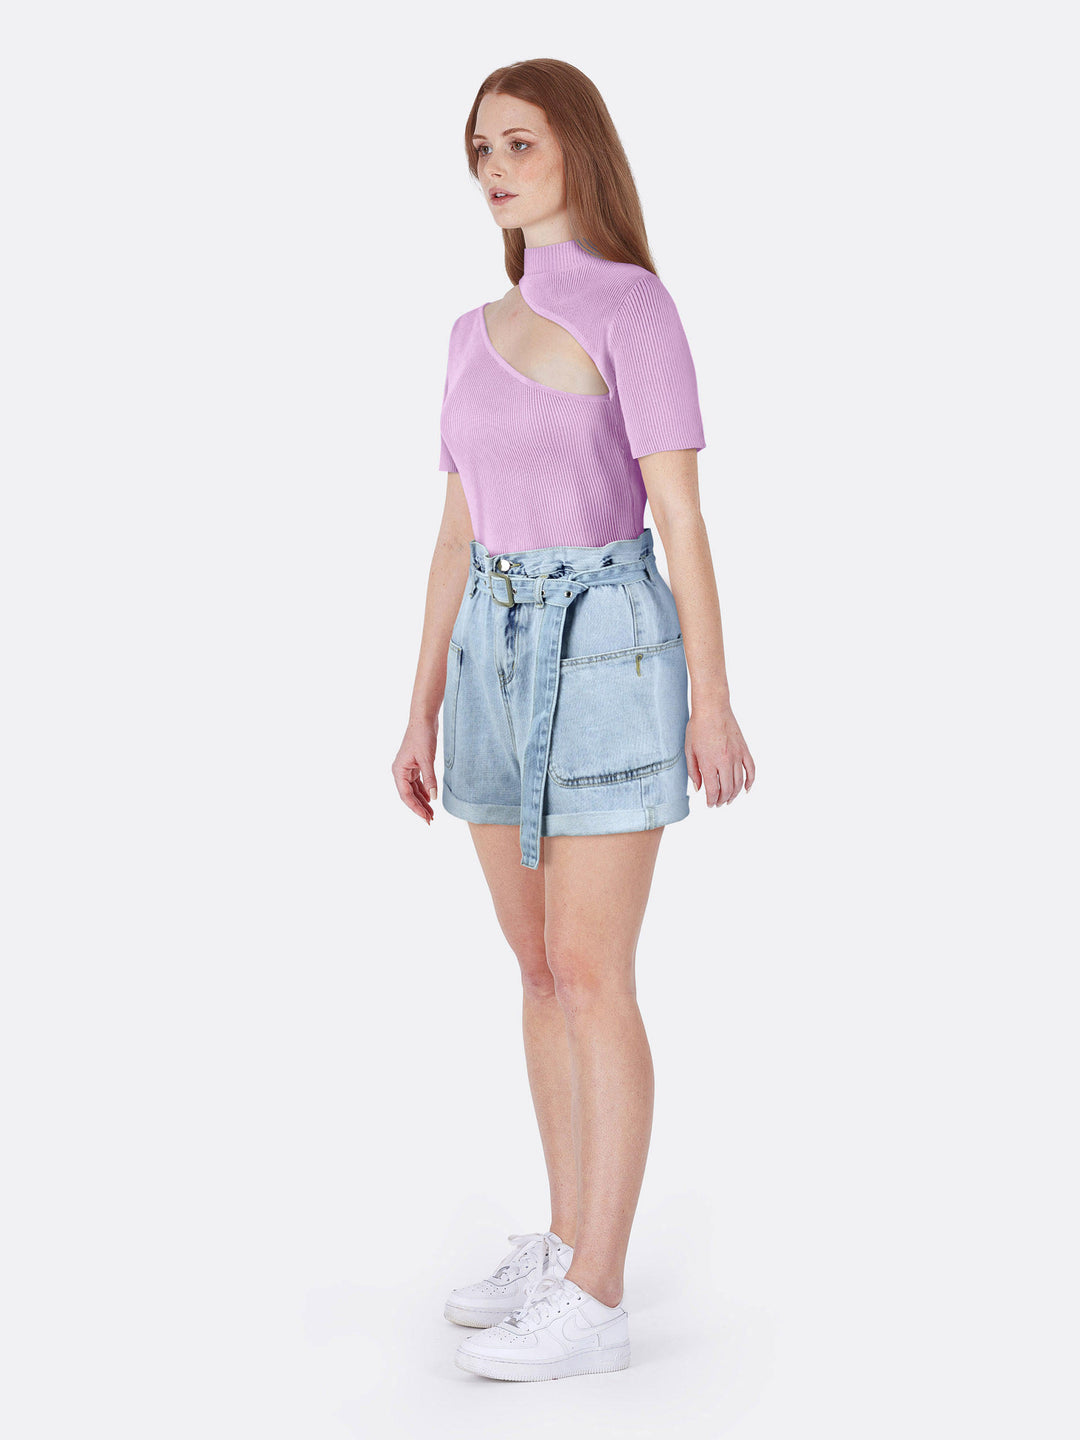 High Neck Short Sleeve Knitted Ribbed Crop Top with Cut Out Pink Side | Jolovies